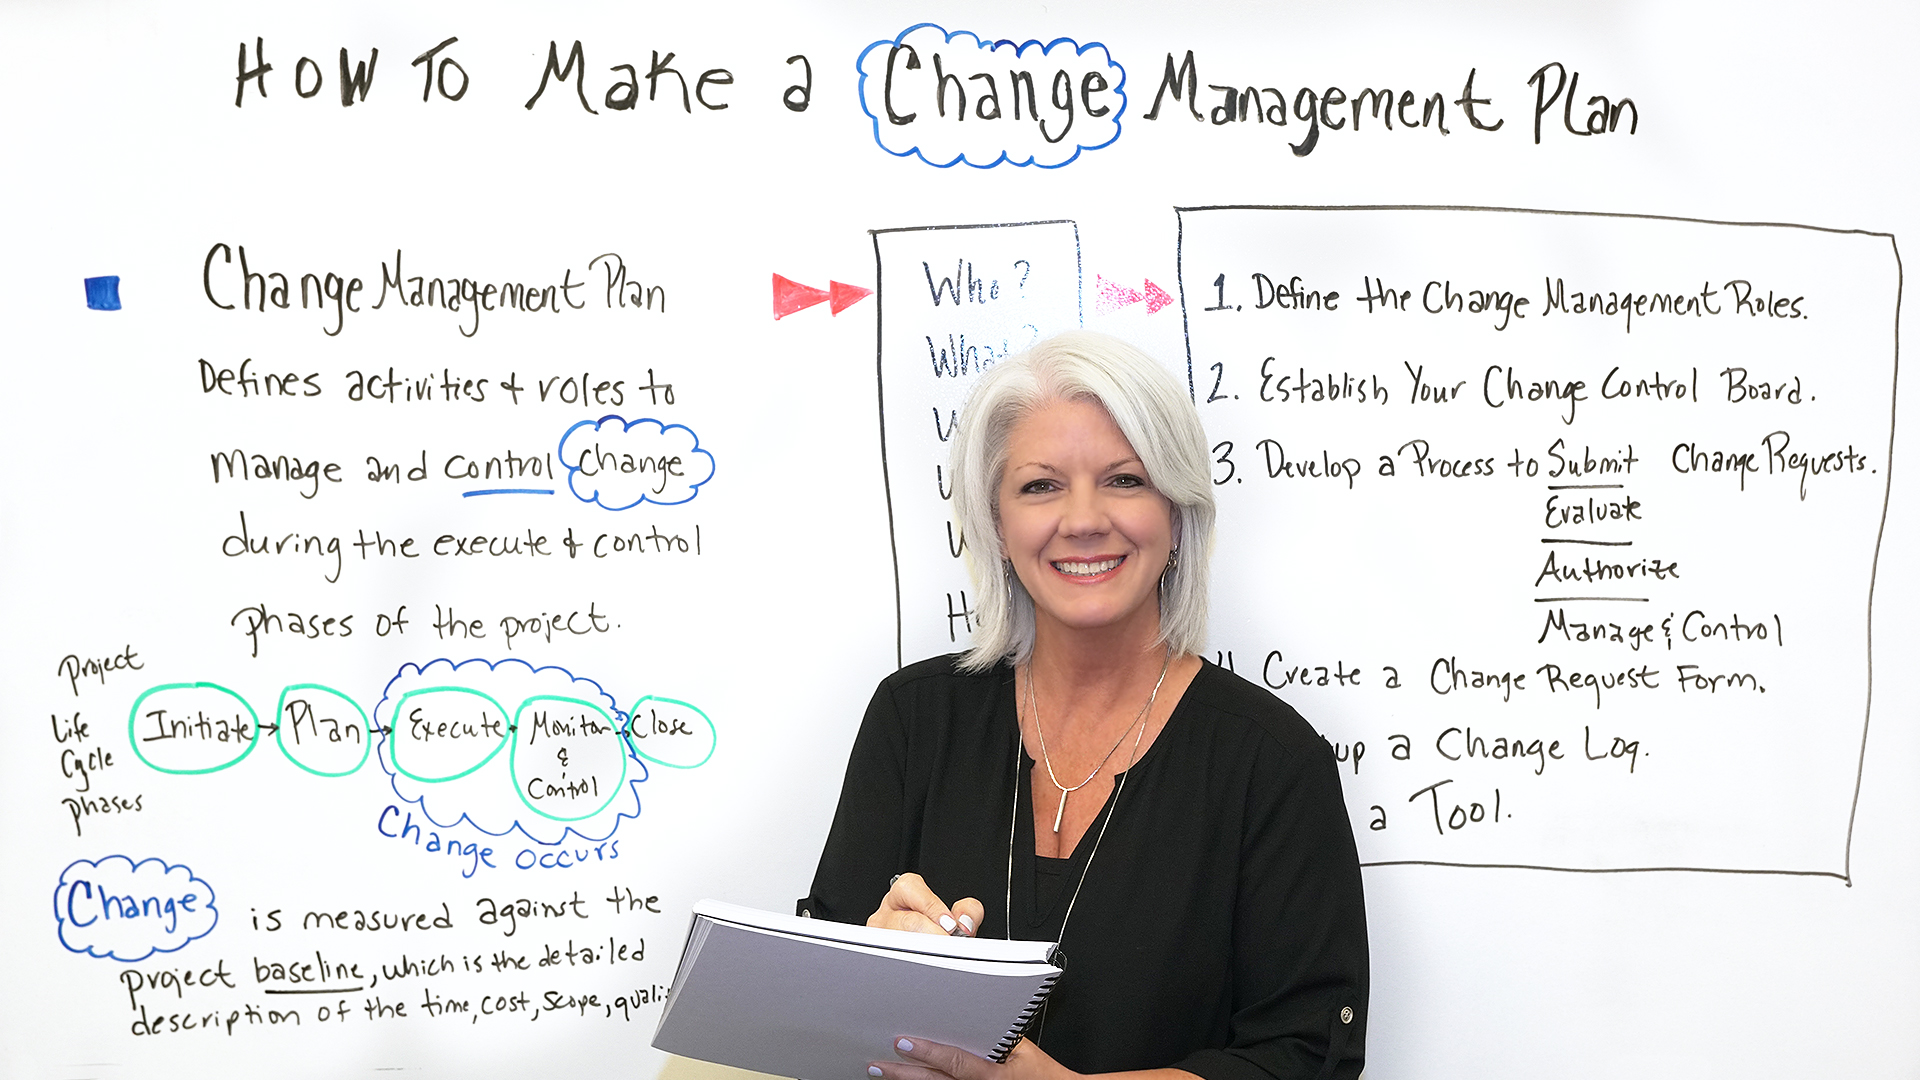 How to Make a Change Management Plan - Project Management Training